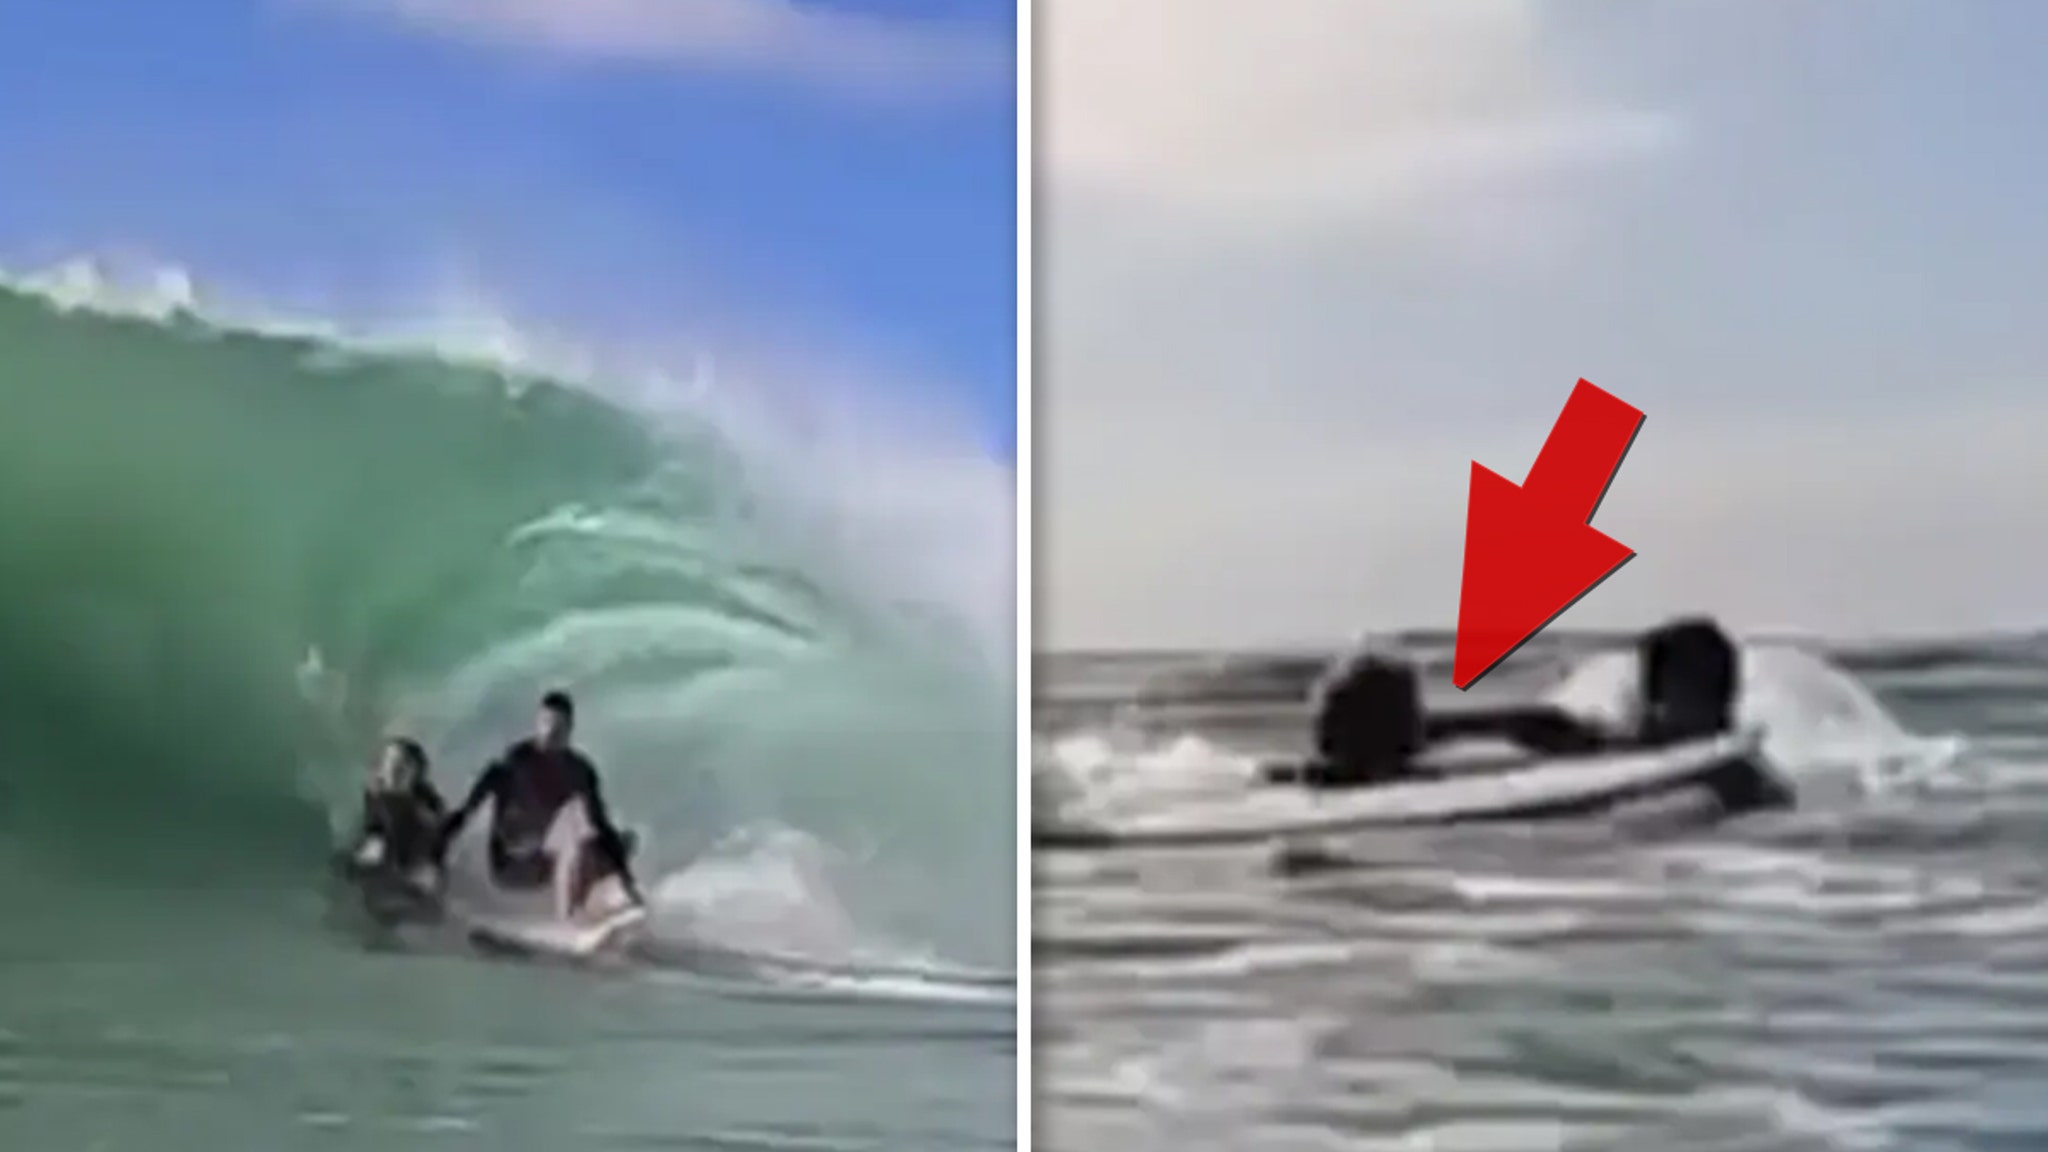 Surfer Attacks Bodyboarder After Wipeout, Video Shows